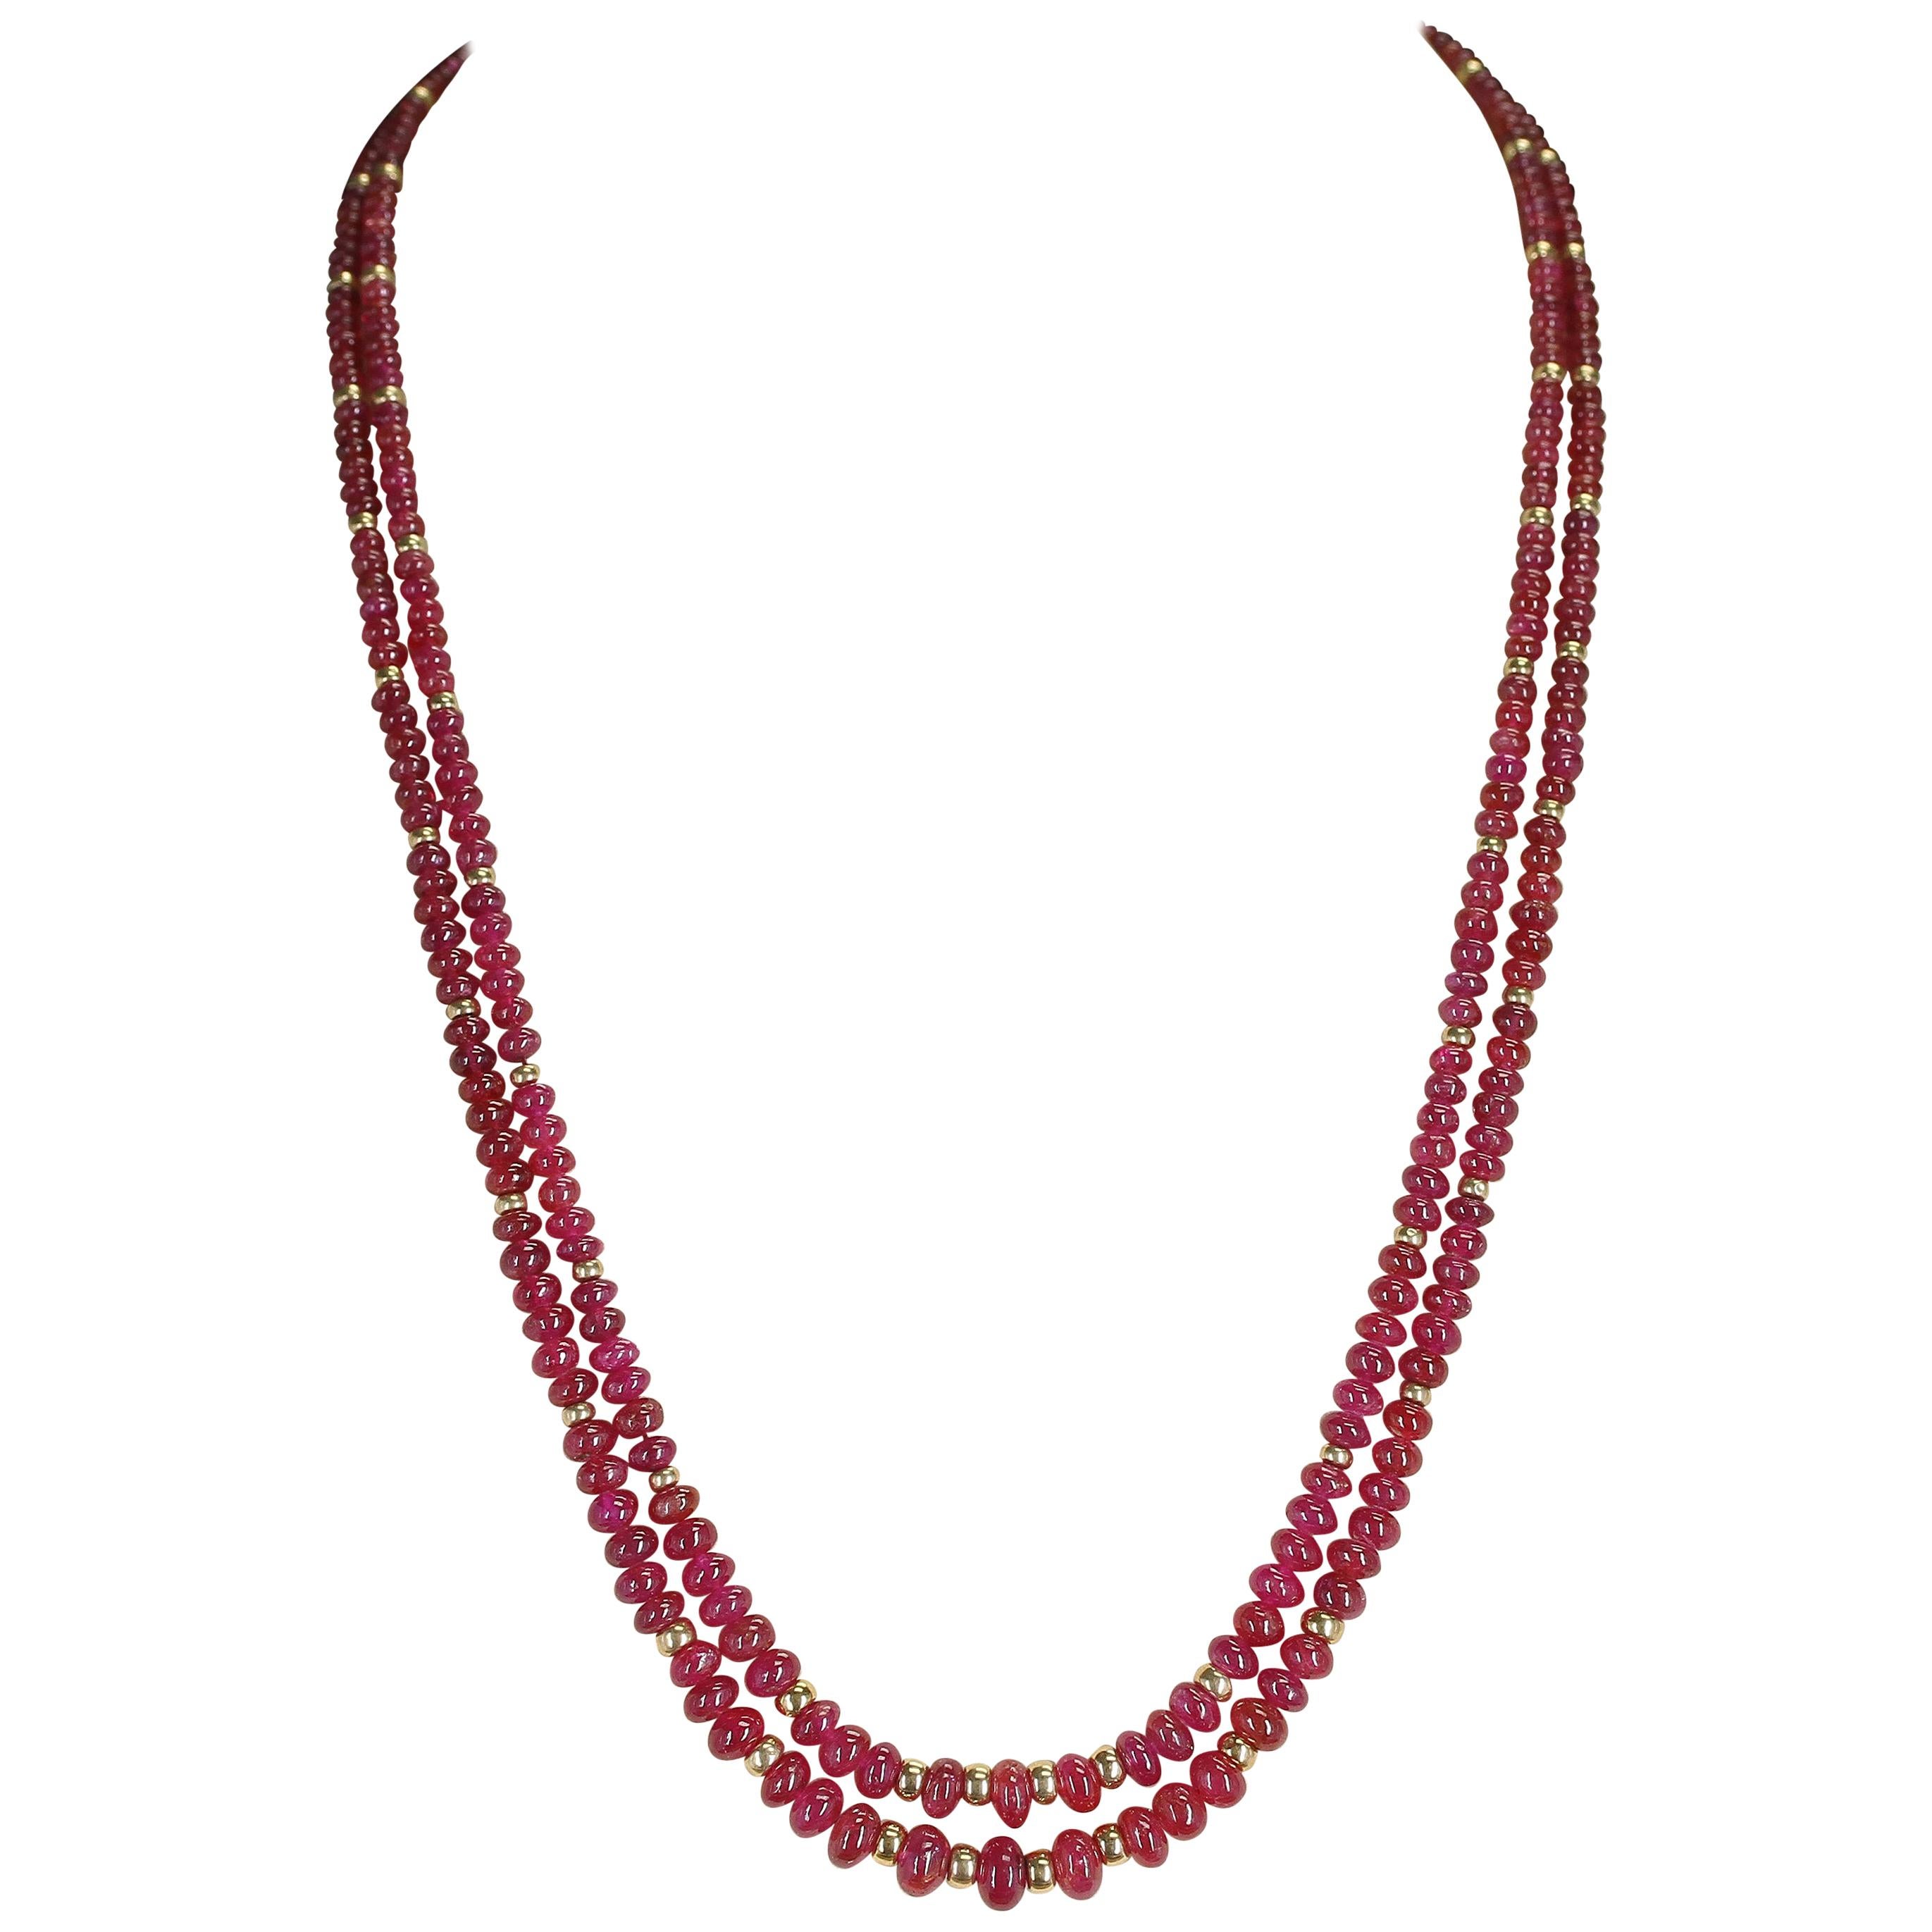 Plain and Smooth Ruby Beads with 14 Karat Gold Beads